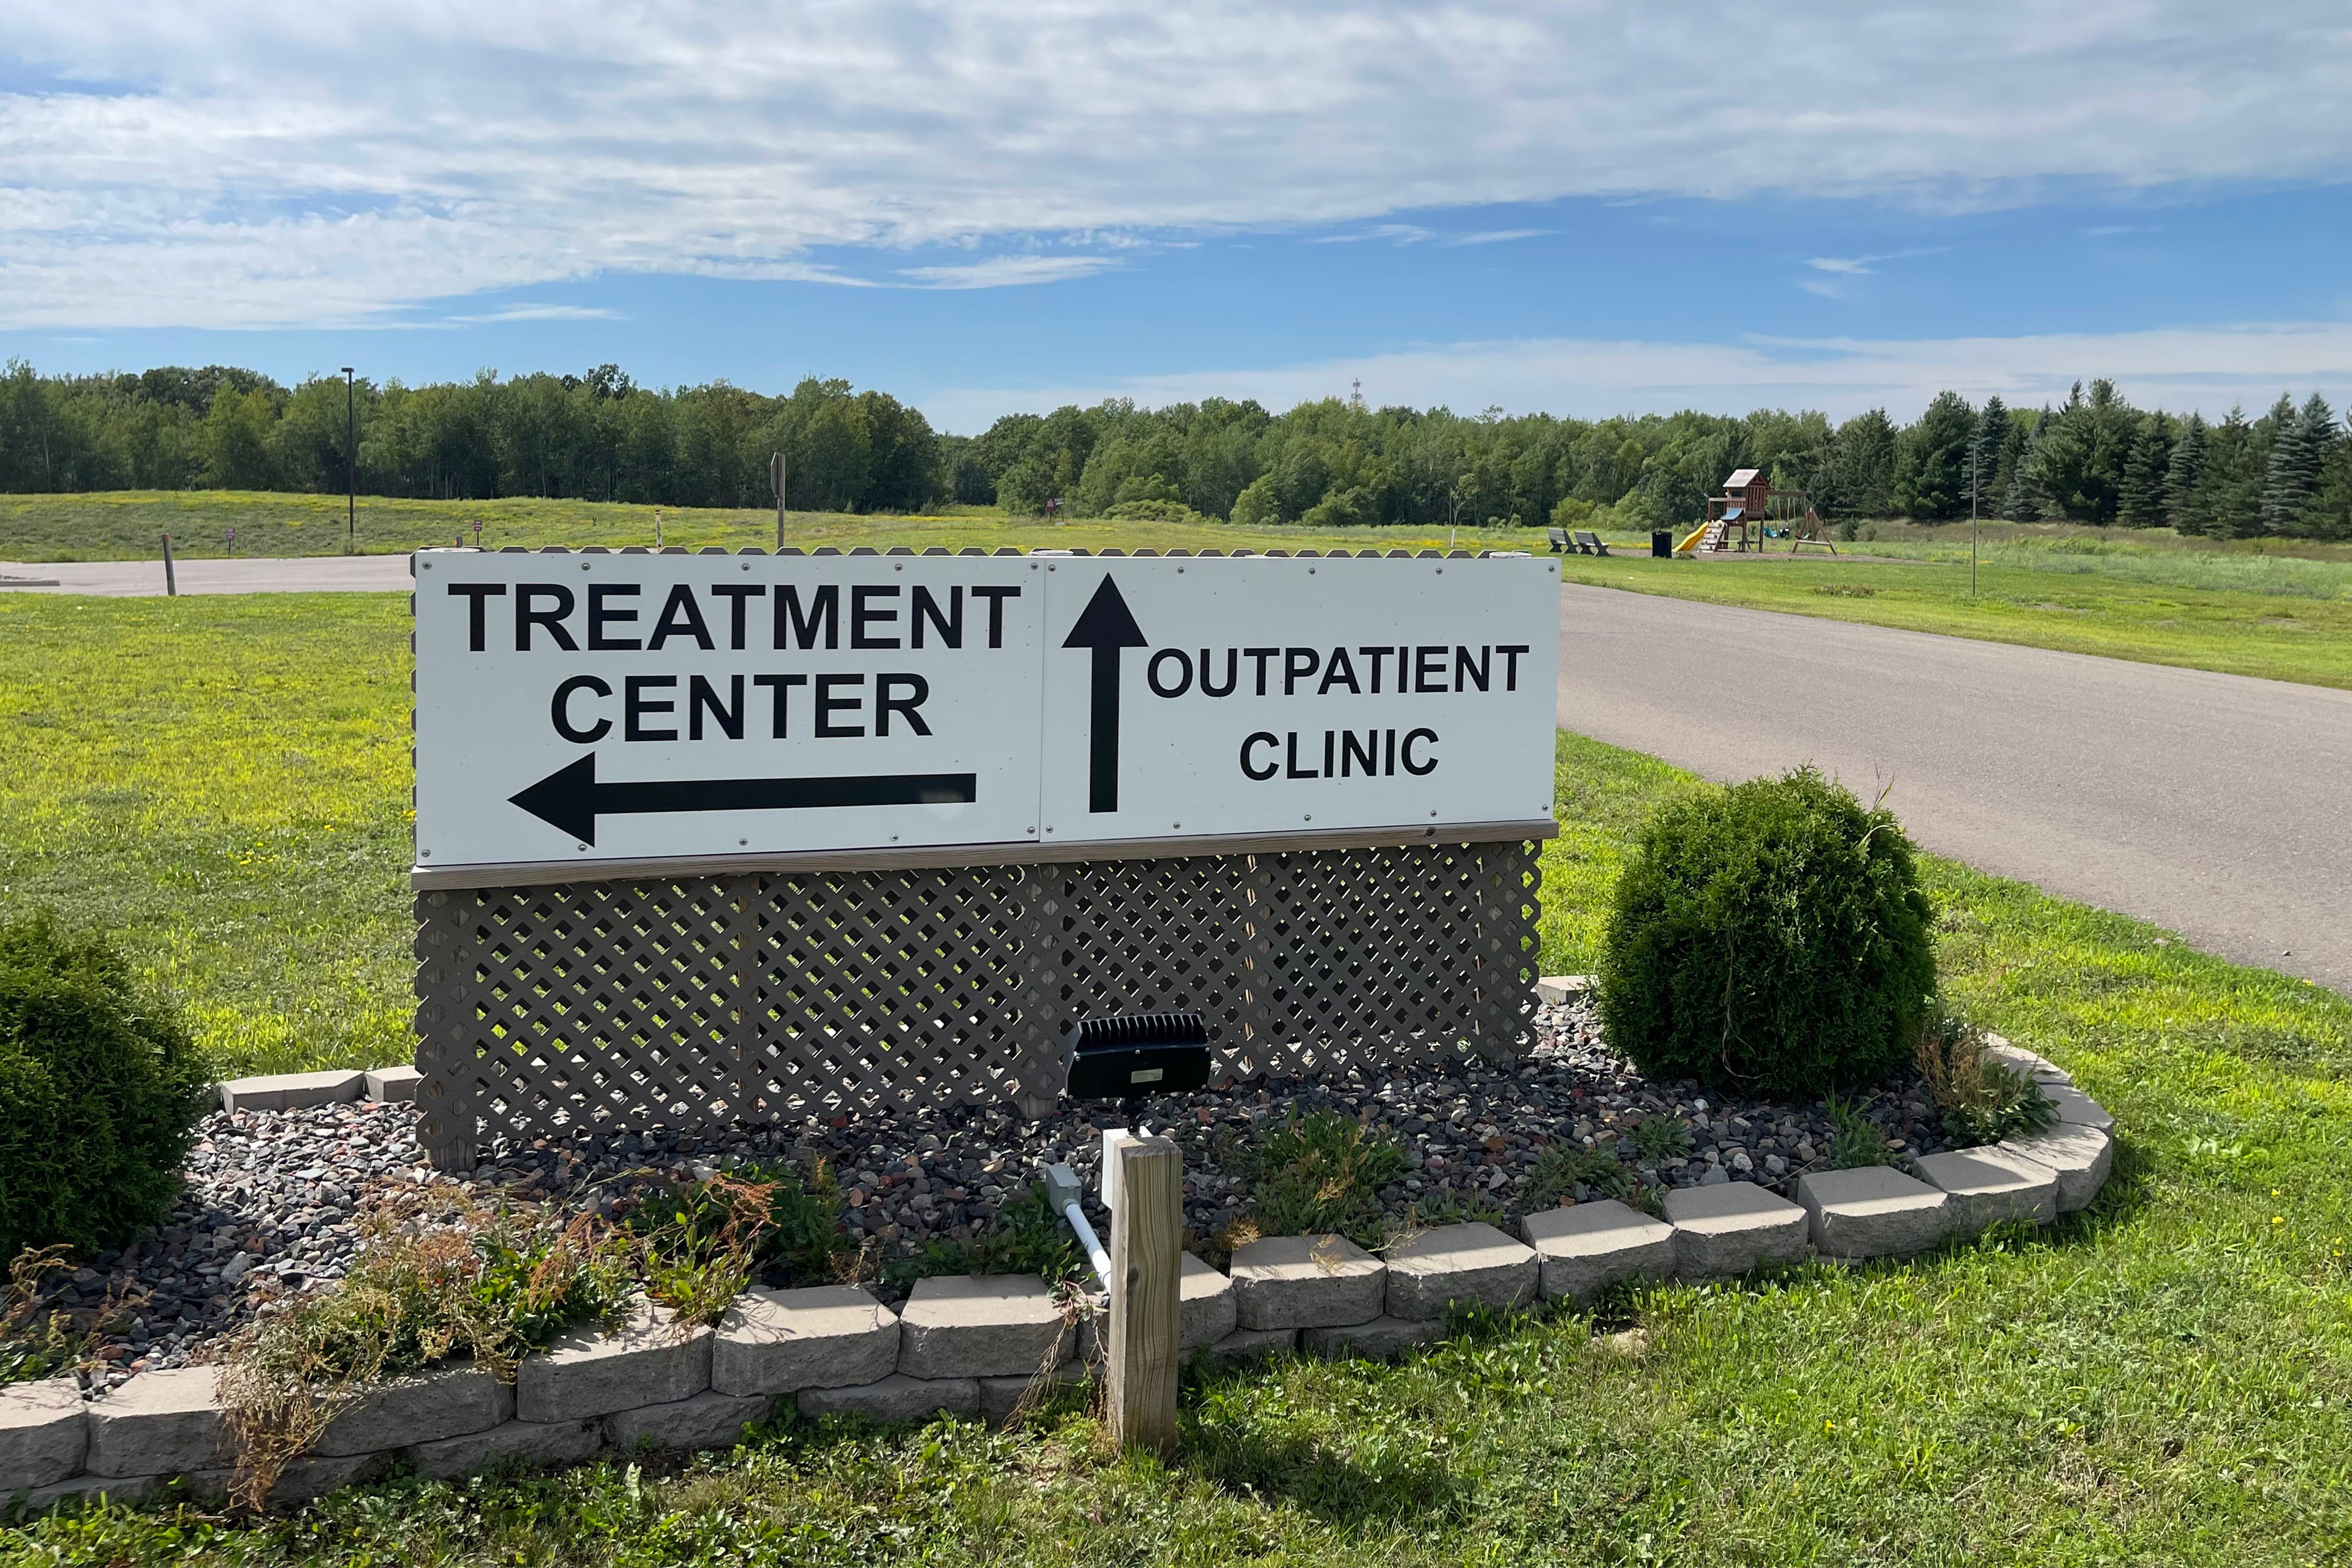 A photo of a sign directing traffic to a treatment center and an outpatient clinic.